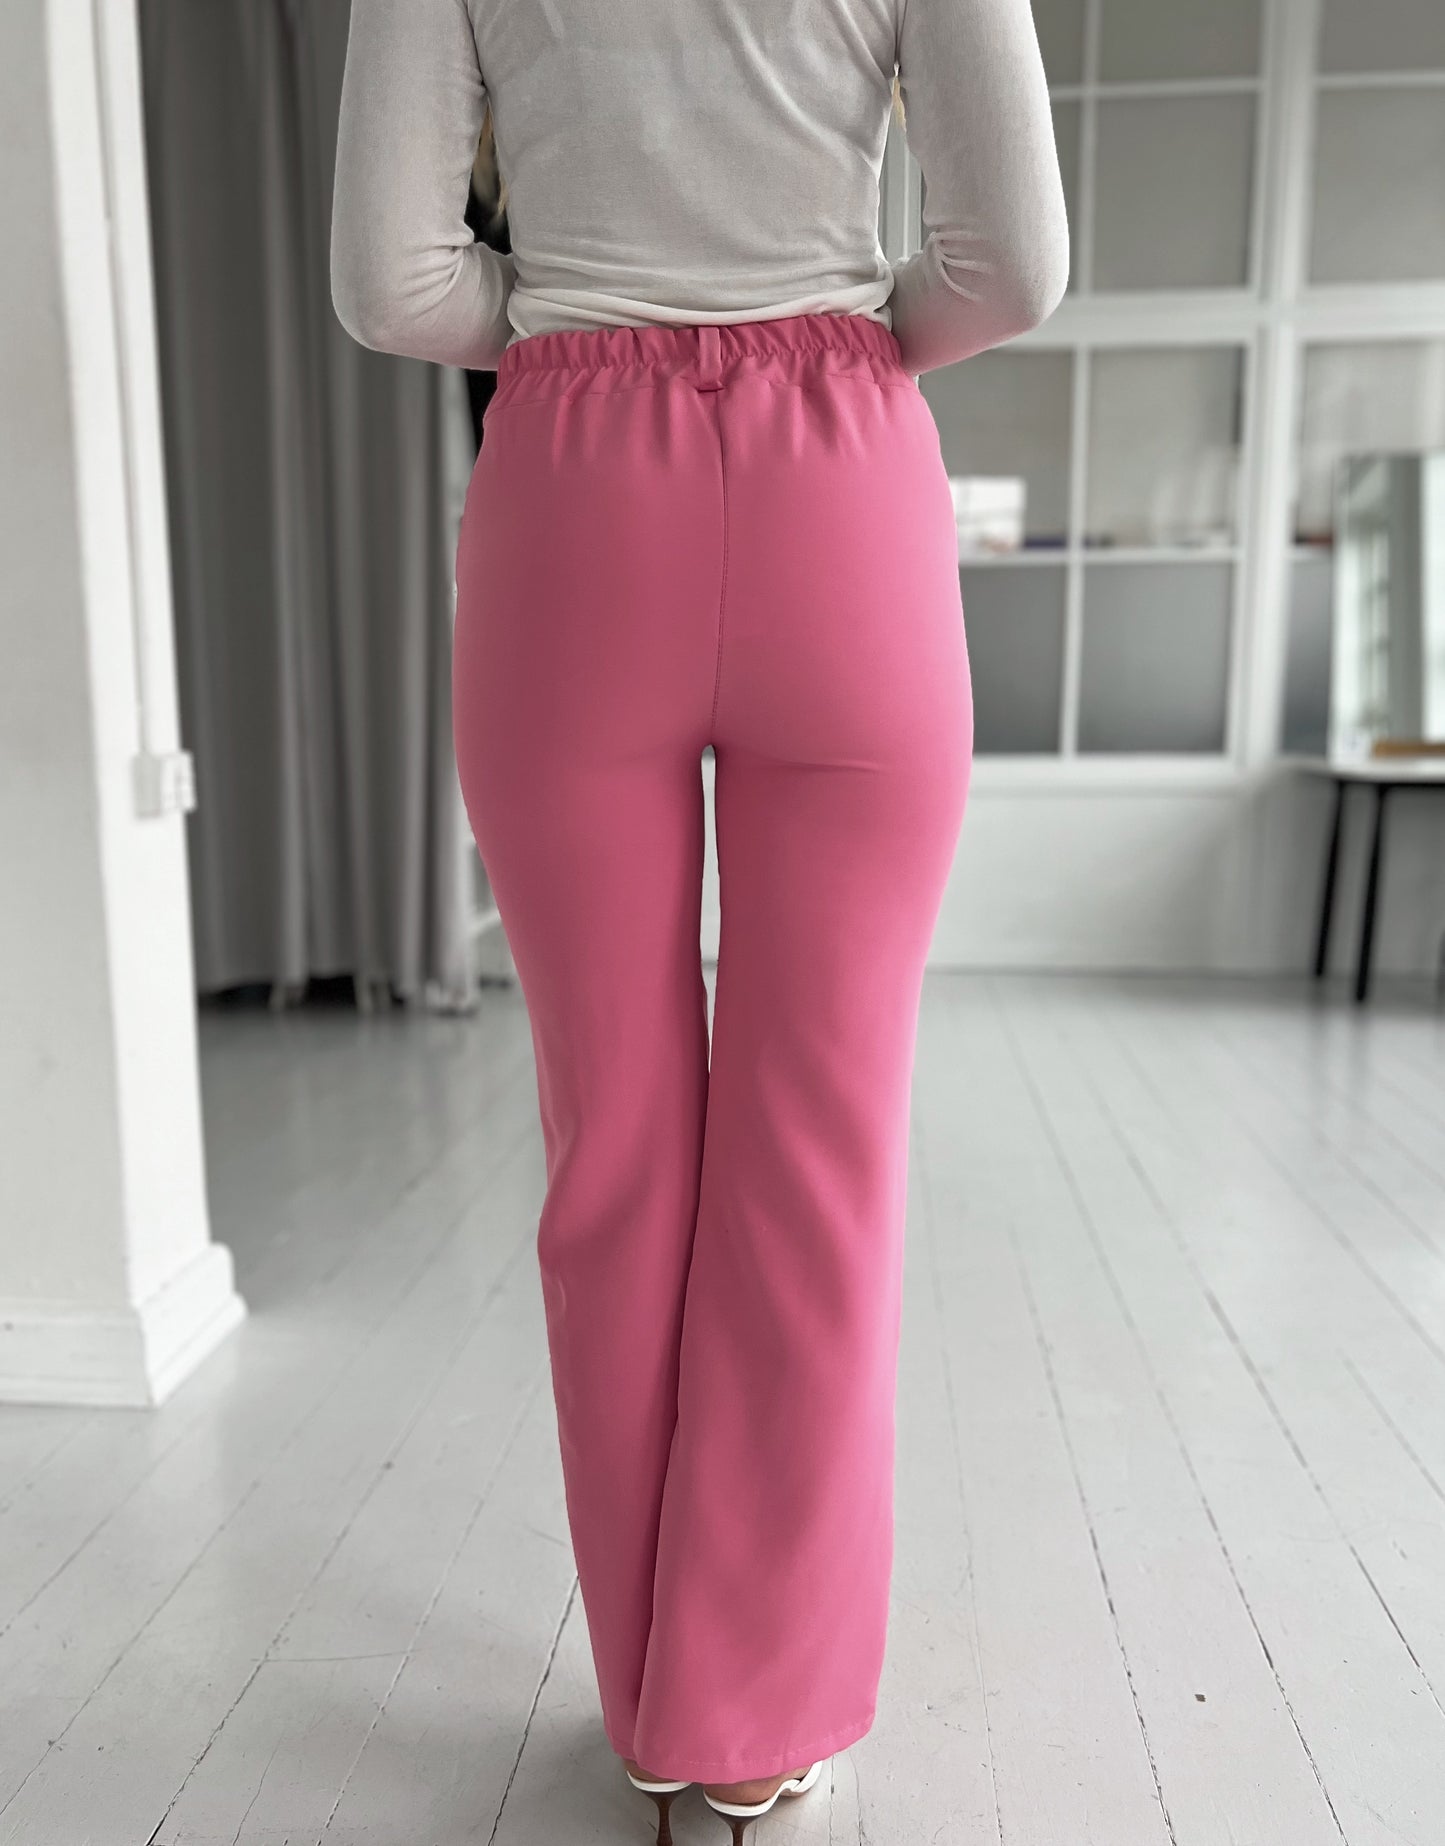 Rosy pink pants